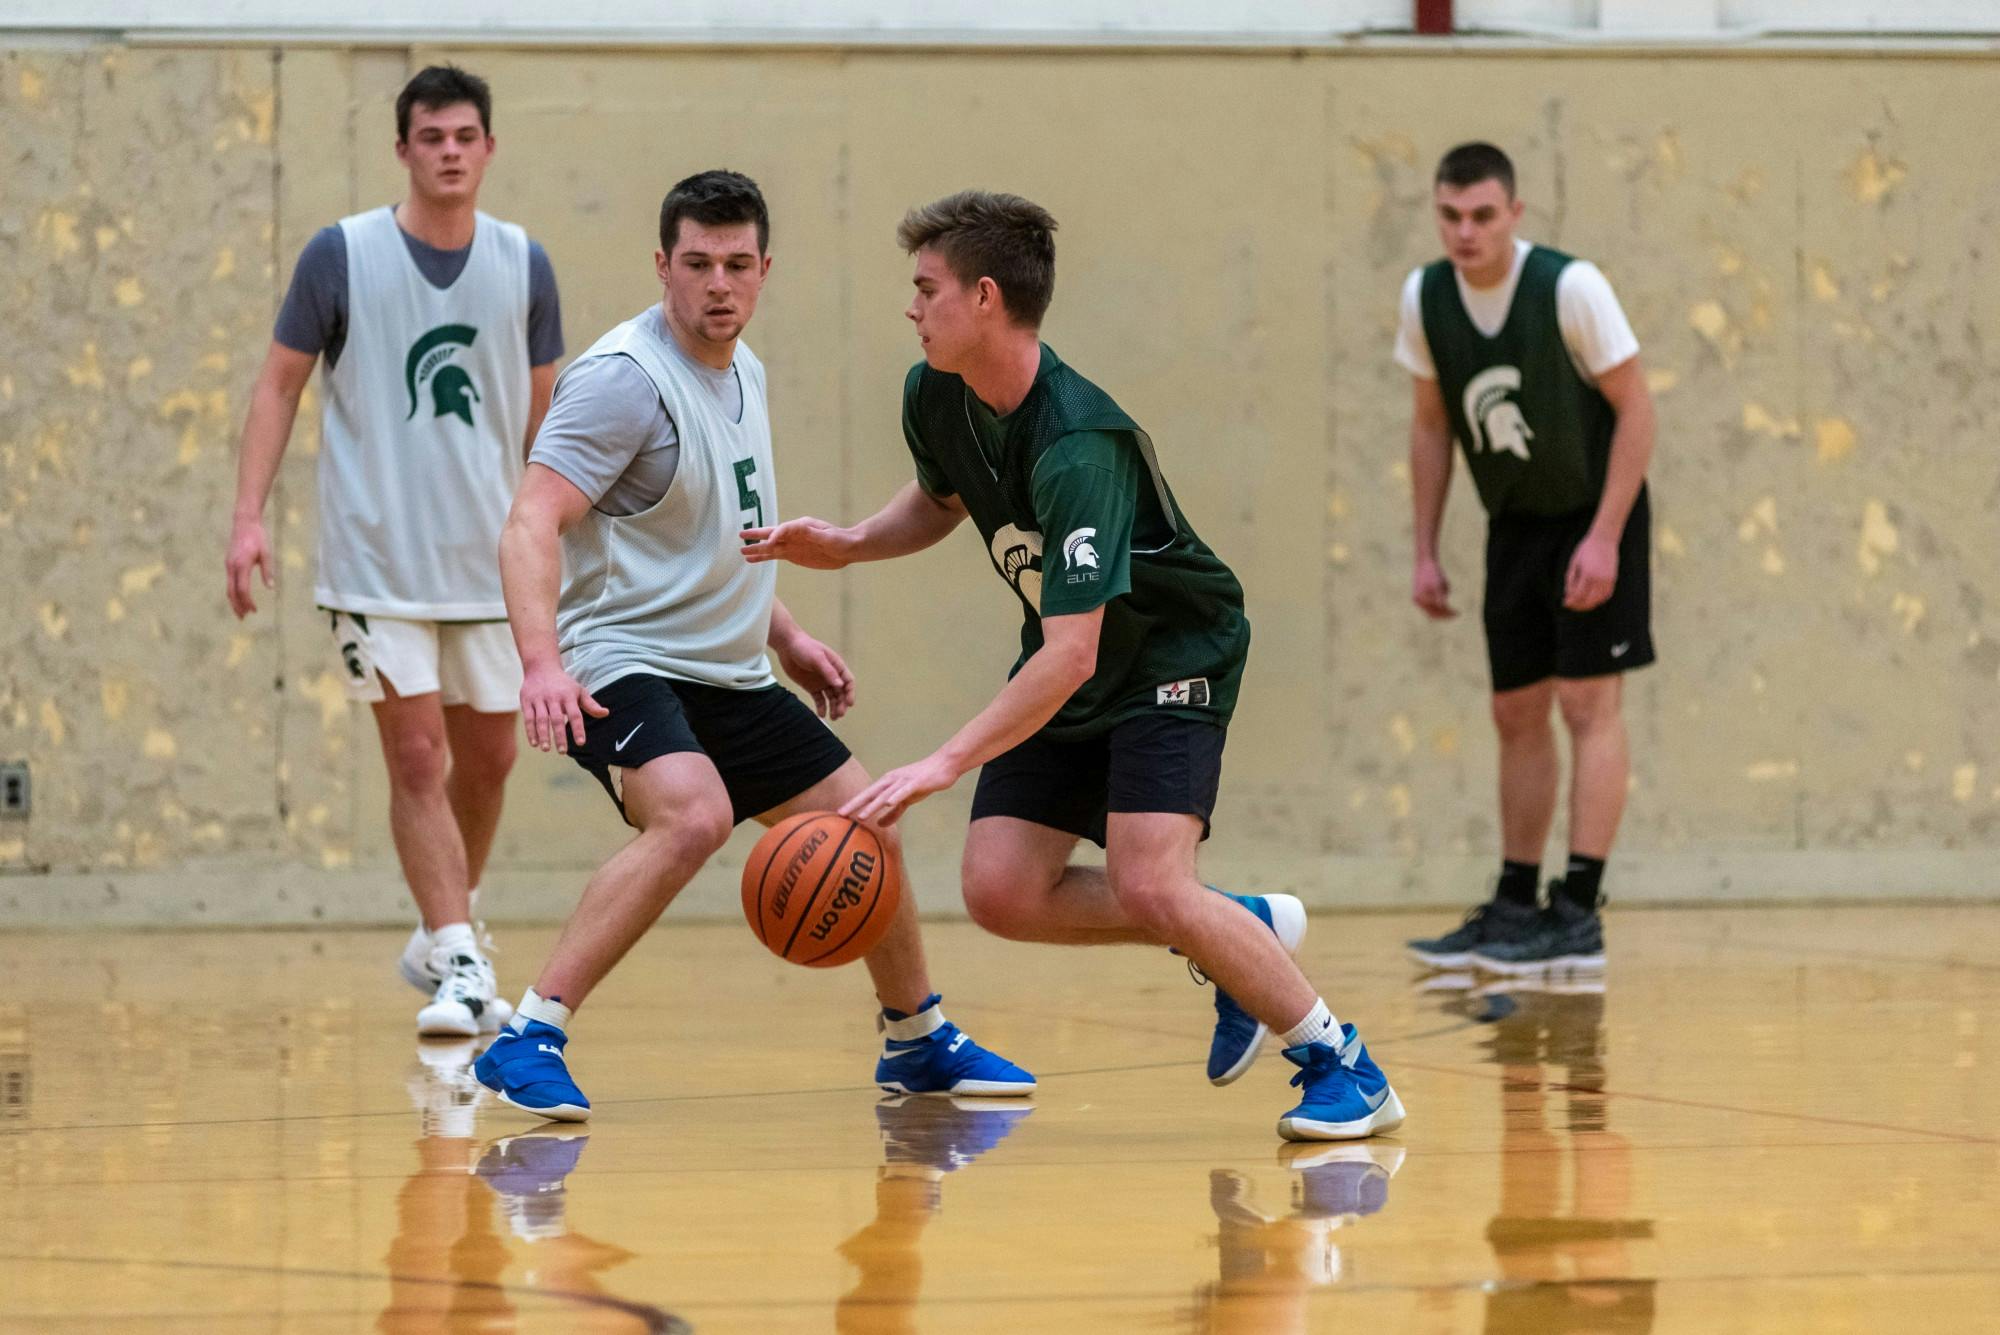 <p>MSU students compete in an intramural basketball game at IM Sports West on February 10, 2020.</p>